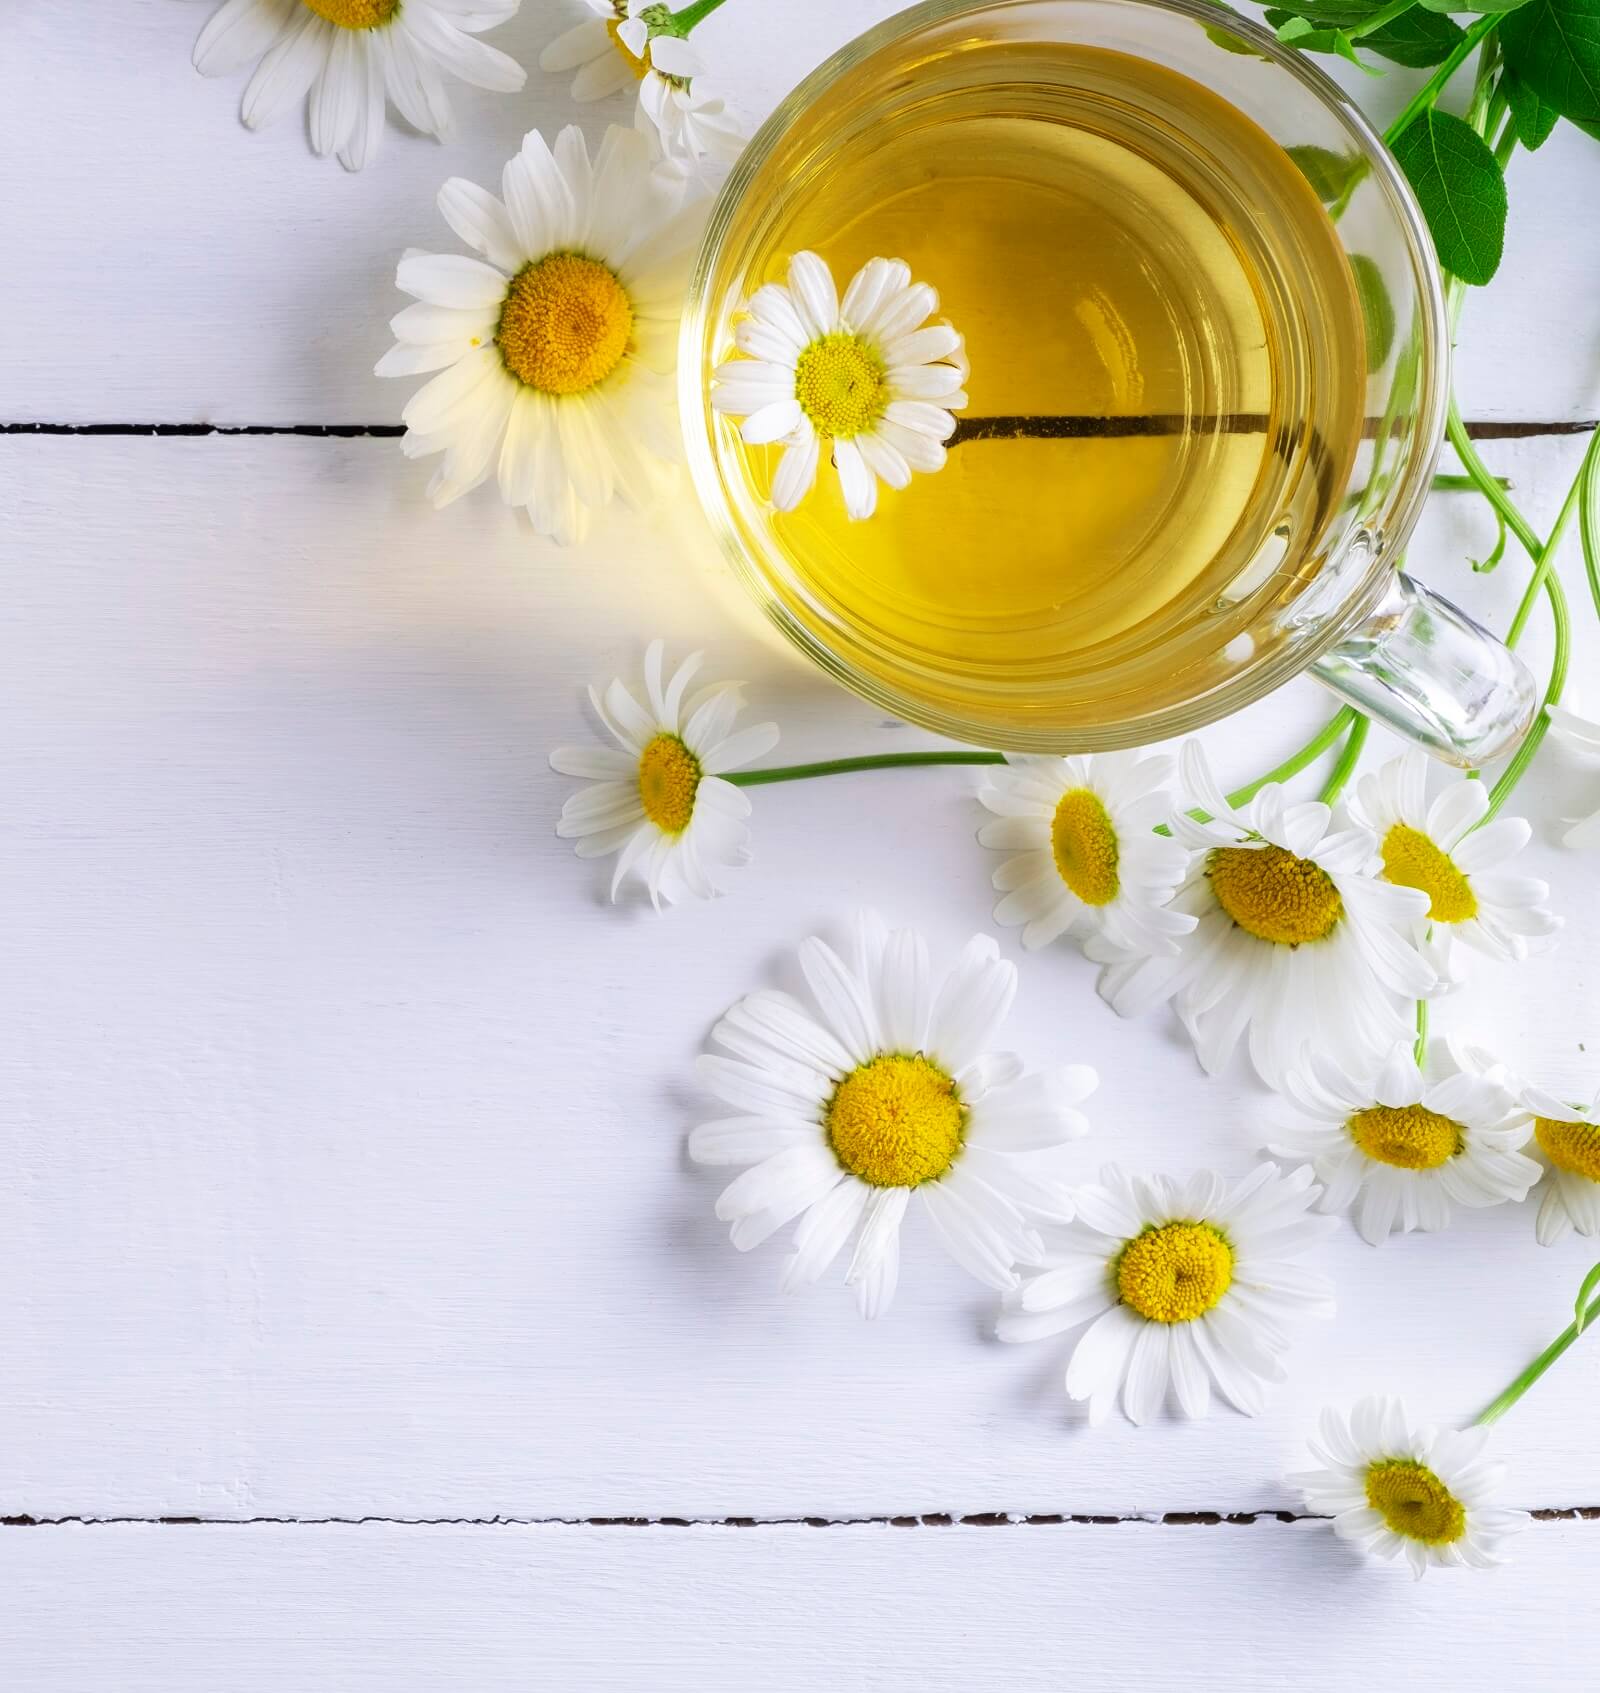 Top view of a cup of chamomile tea. Close-up top view of a cup of chamomile tea and flowers. Alternative and traditional medicine.